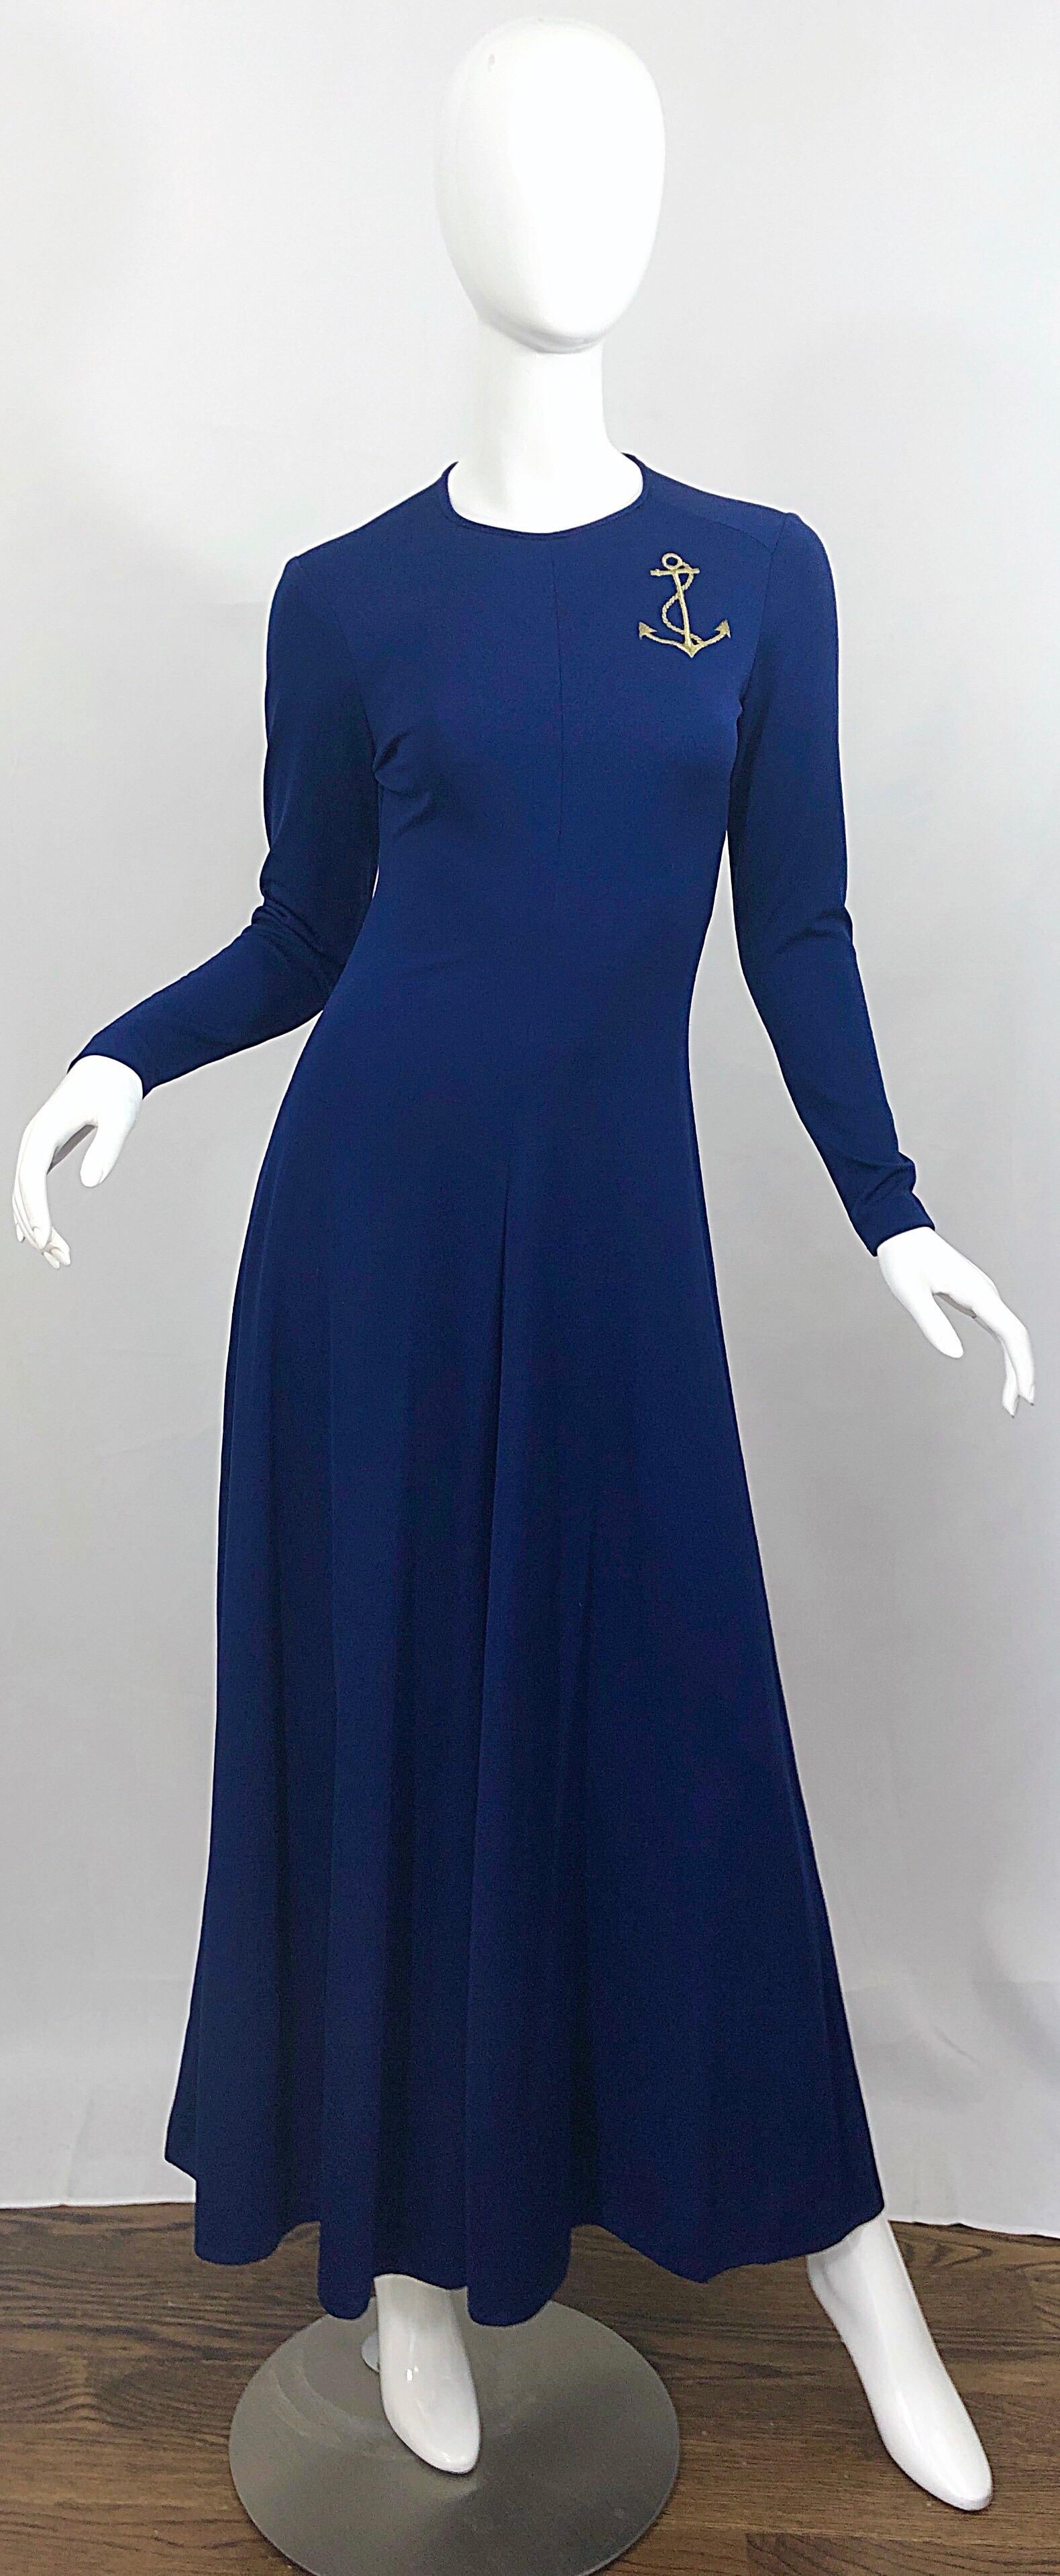 Amazing vintage 70s navy blue + gold anchor patch long sleeve jersey maxi dress! Perfect navy blue color matches anything, and is great all year. Gold anchor patch above left breast. Sleek tailored fit, with a forgiving fuller skirt. Hidden zipper